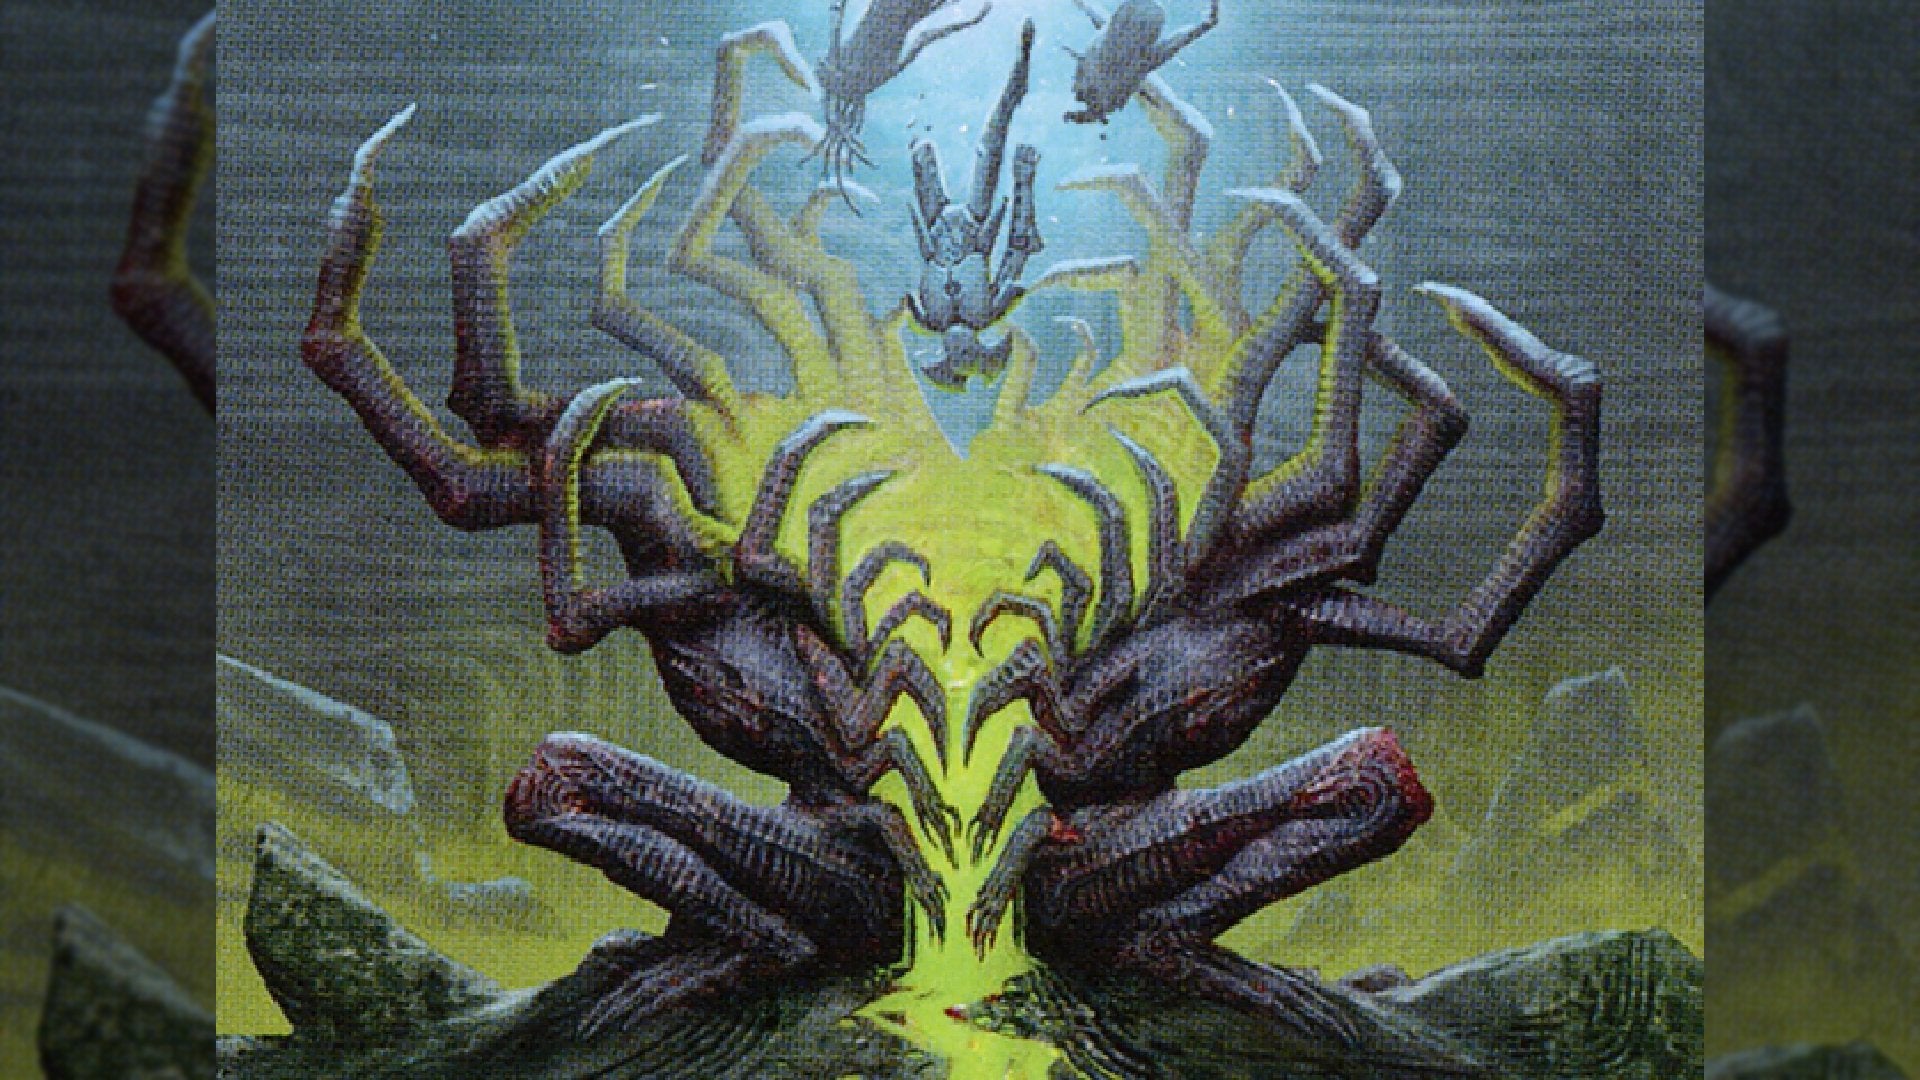 Card art from the black creature card Gulping Scraptrap that depicts a spider-like chasm devouring humanoids.